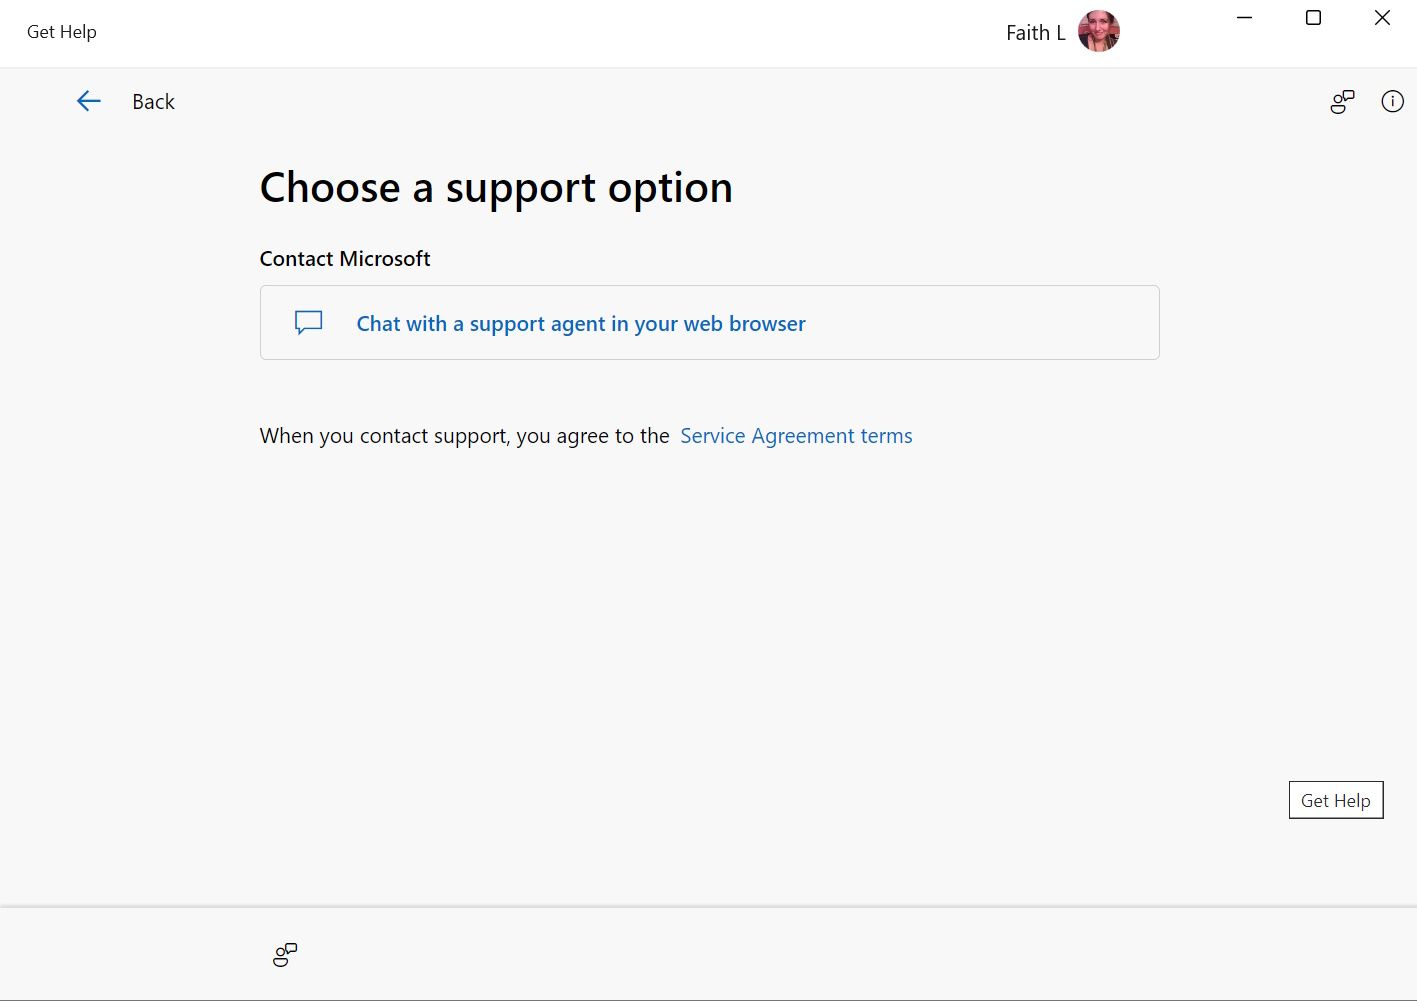 choose a support option in get help windows app